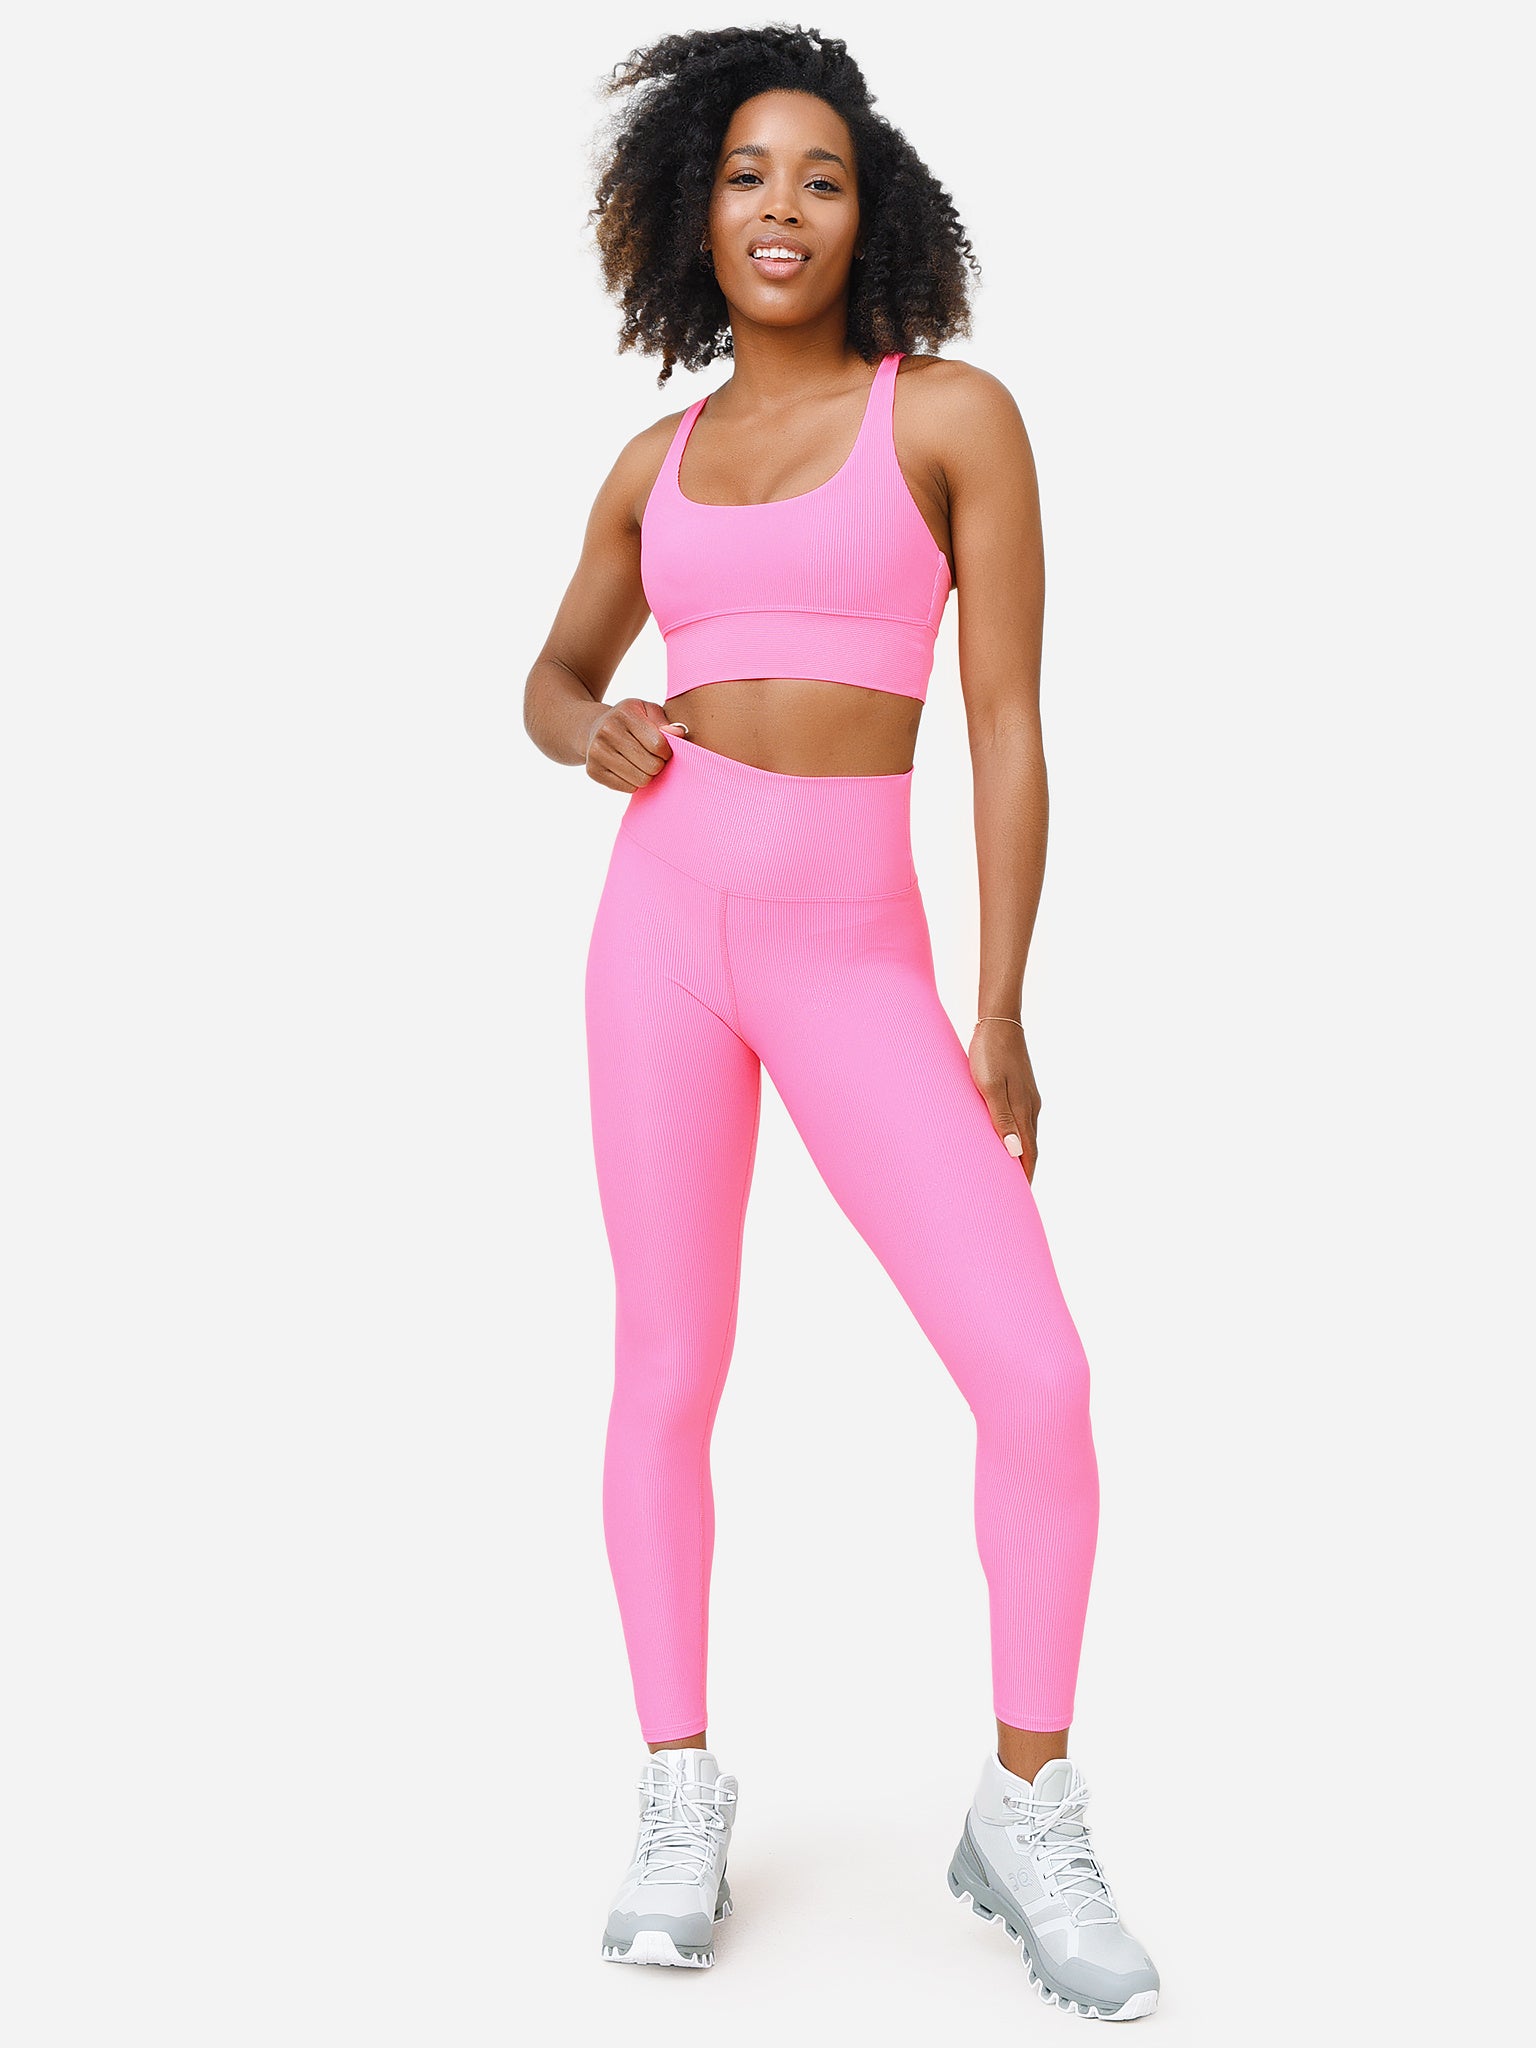 Beach Riot Ayla Legging Pink  Pink leggings, Athleisure outfits, Beach riot